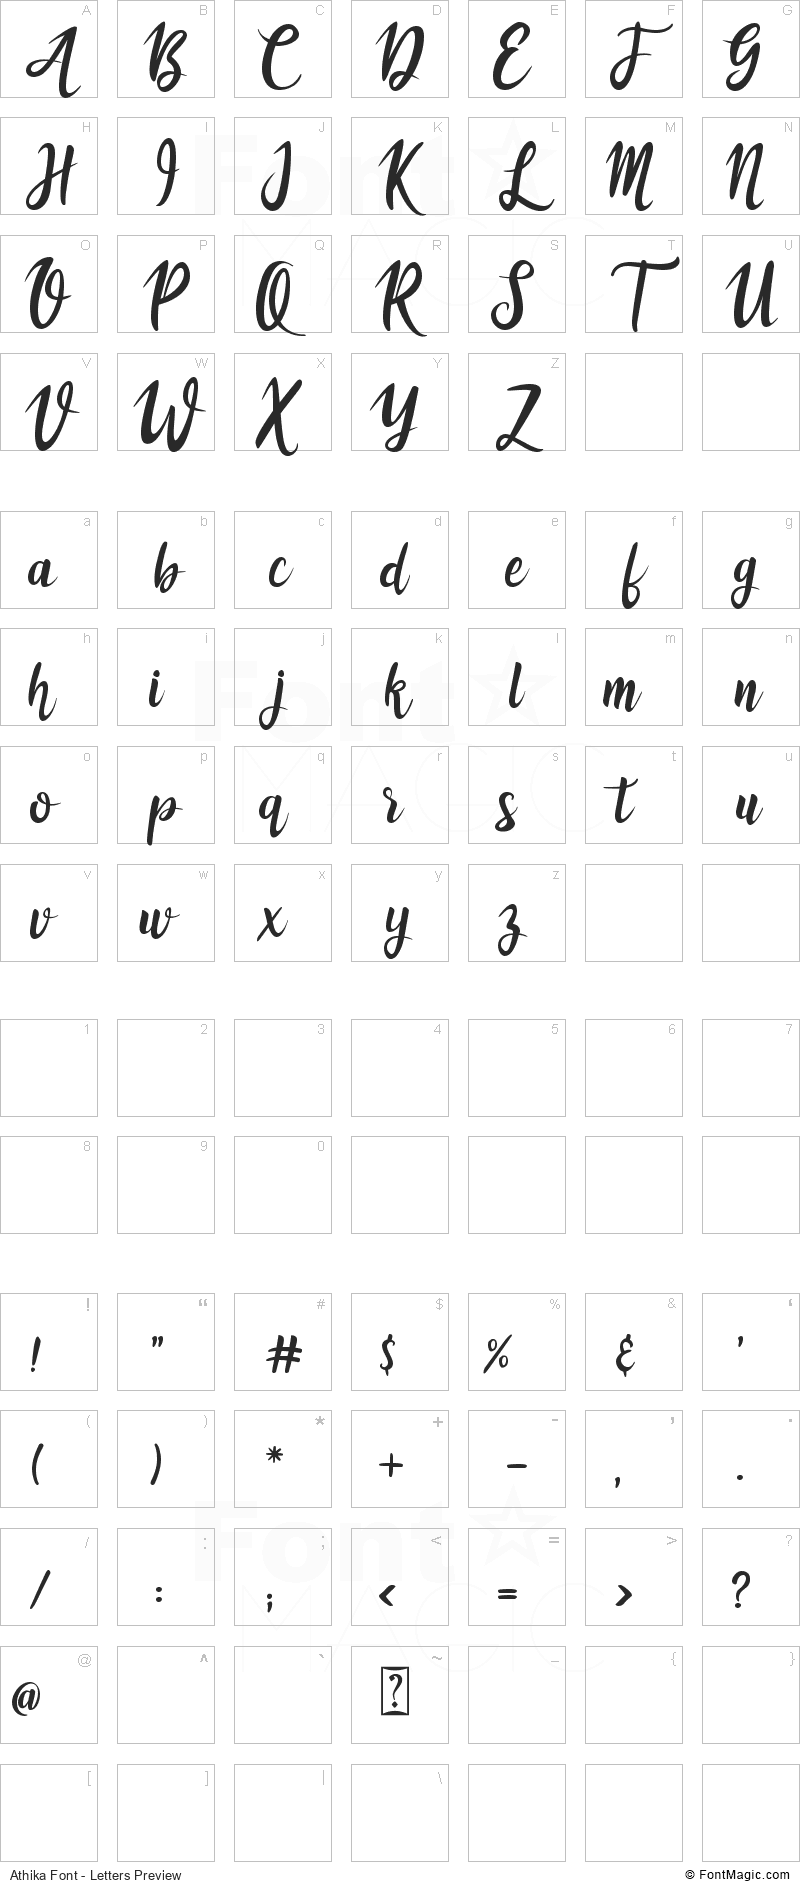 Athika Font - All Latters Preview Chart